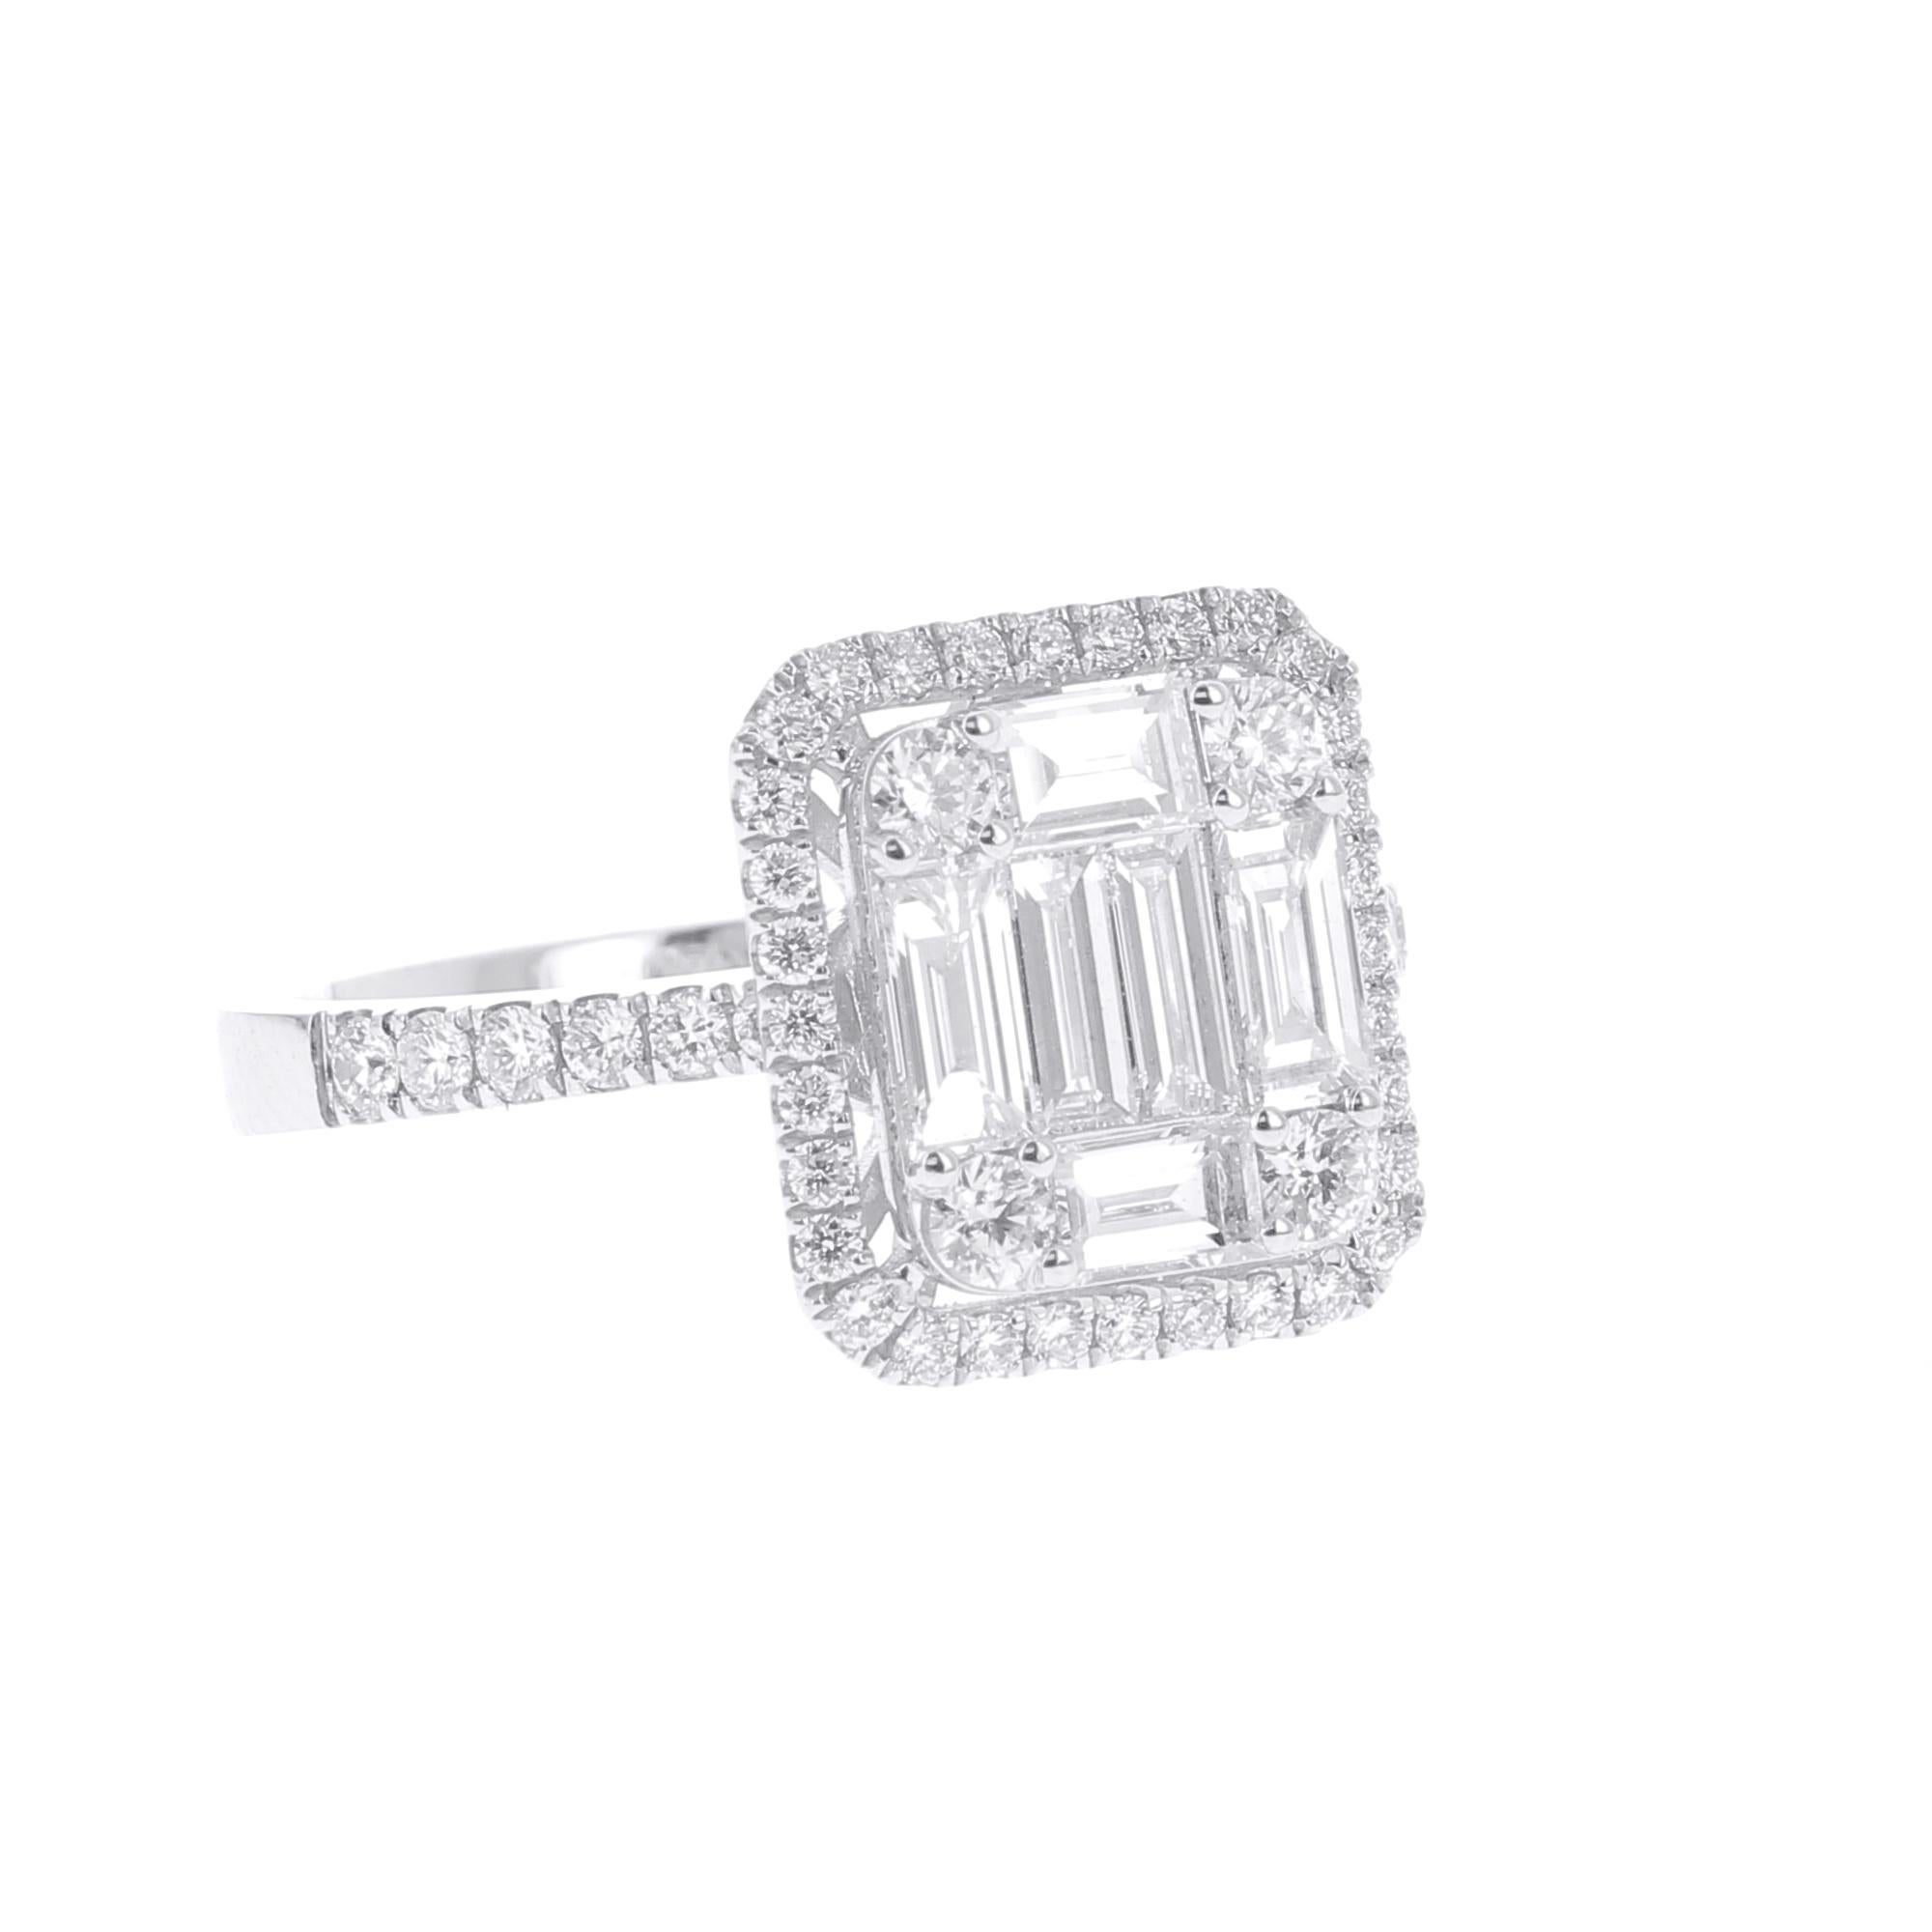 An unique Illusion Diamonds Ring set with Round Diamonds and Baguettes Diamonds giving the impression of One Emerald Cut Diamond 
surrounded by Round Brilliant Cut White Diamonds 
The ring is set with 6 Baguettes Diamonds weighing 0..72 Carat, 4